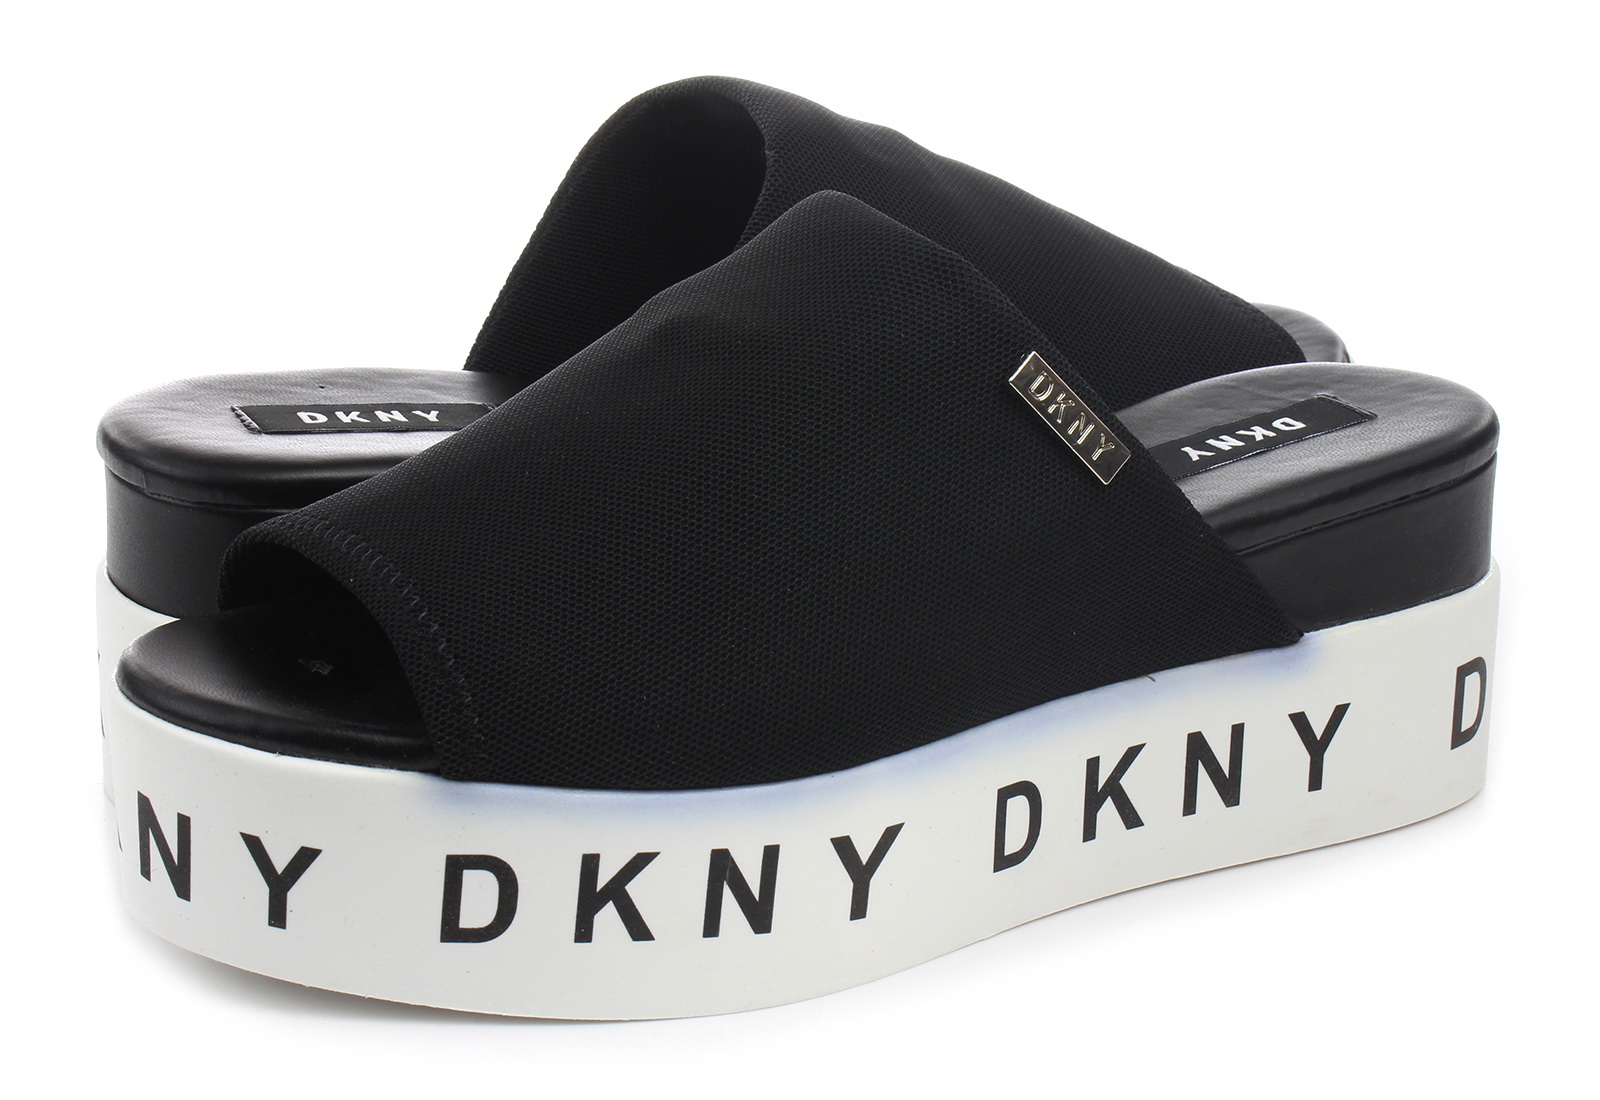 Warship cock lime DKNY Papuci - Carli - K1527368-blk - Office Shoes Romania